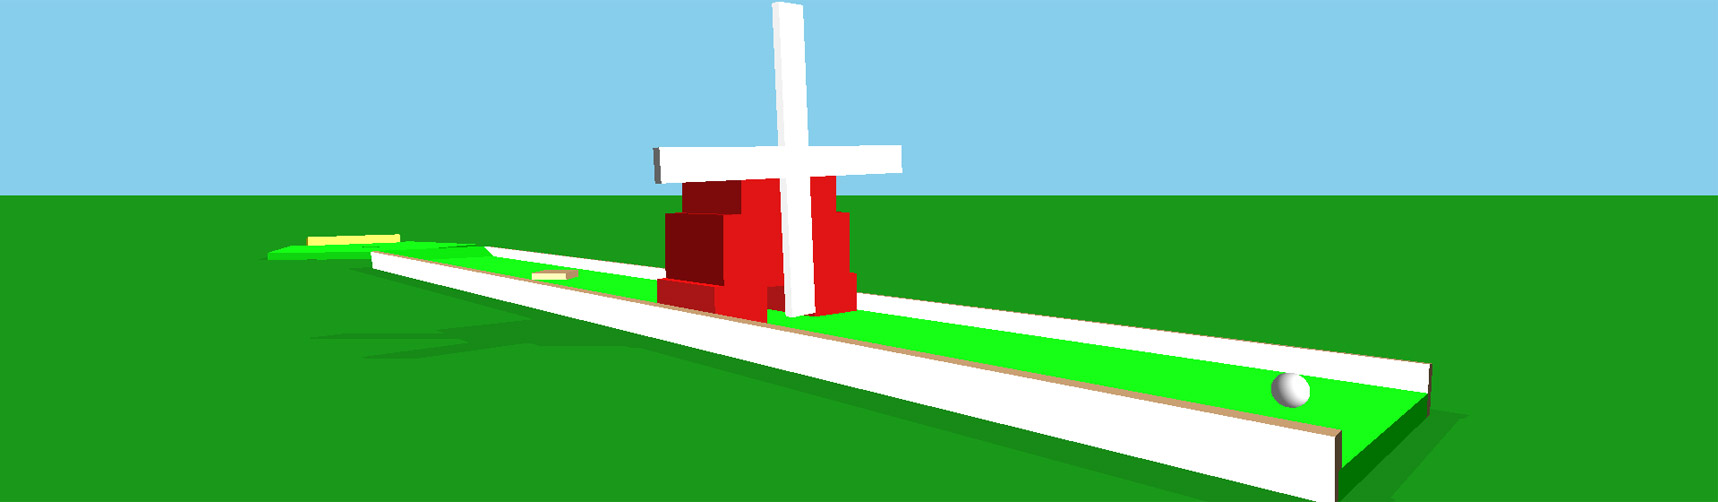 An image of a minigolf course from the Minigolf game